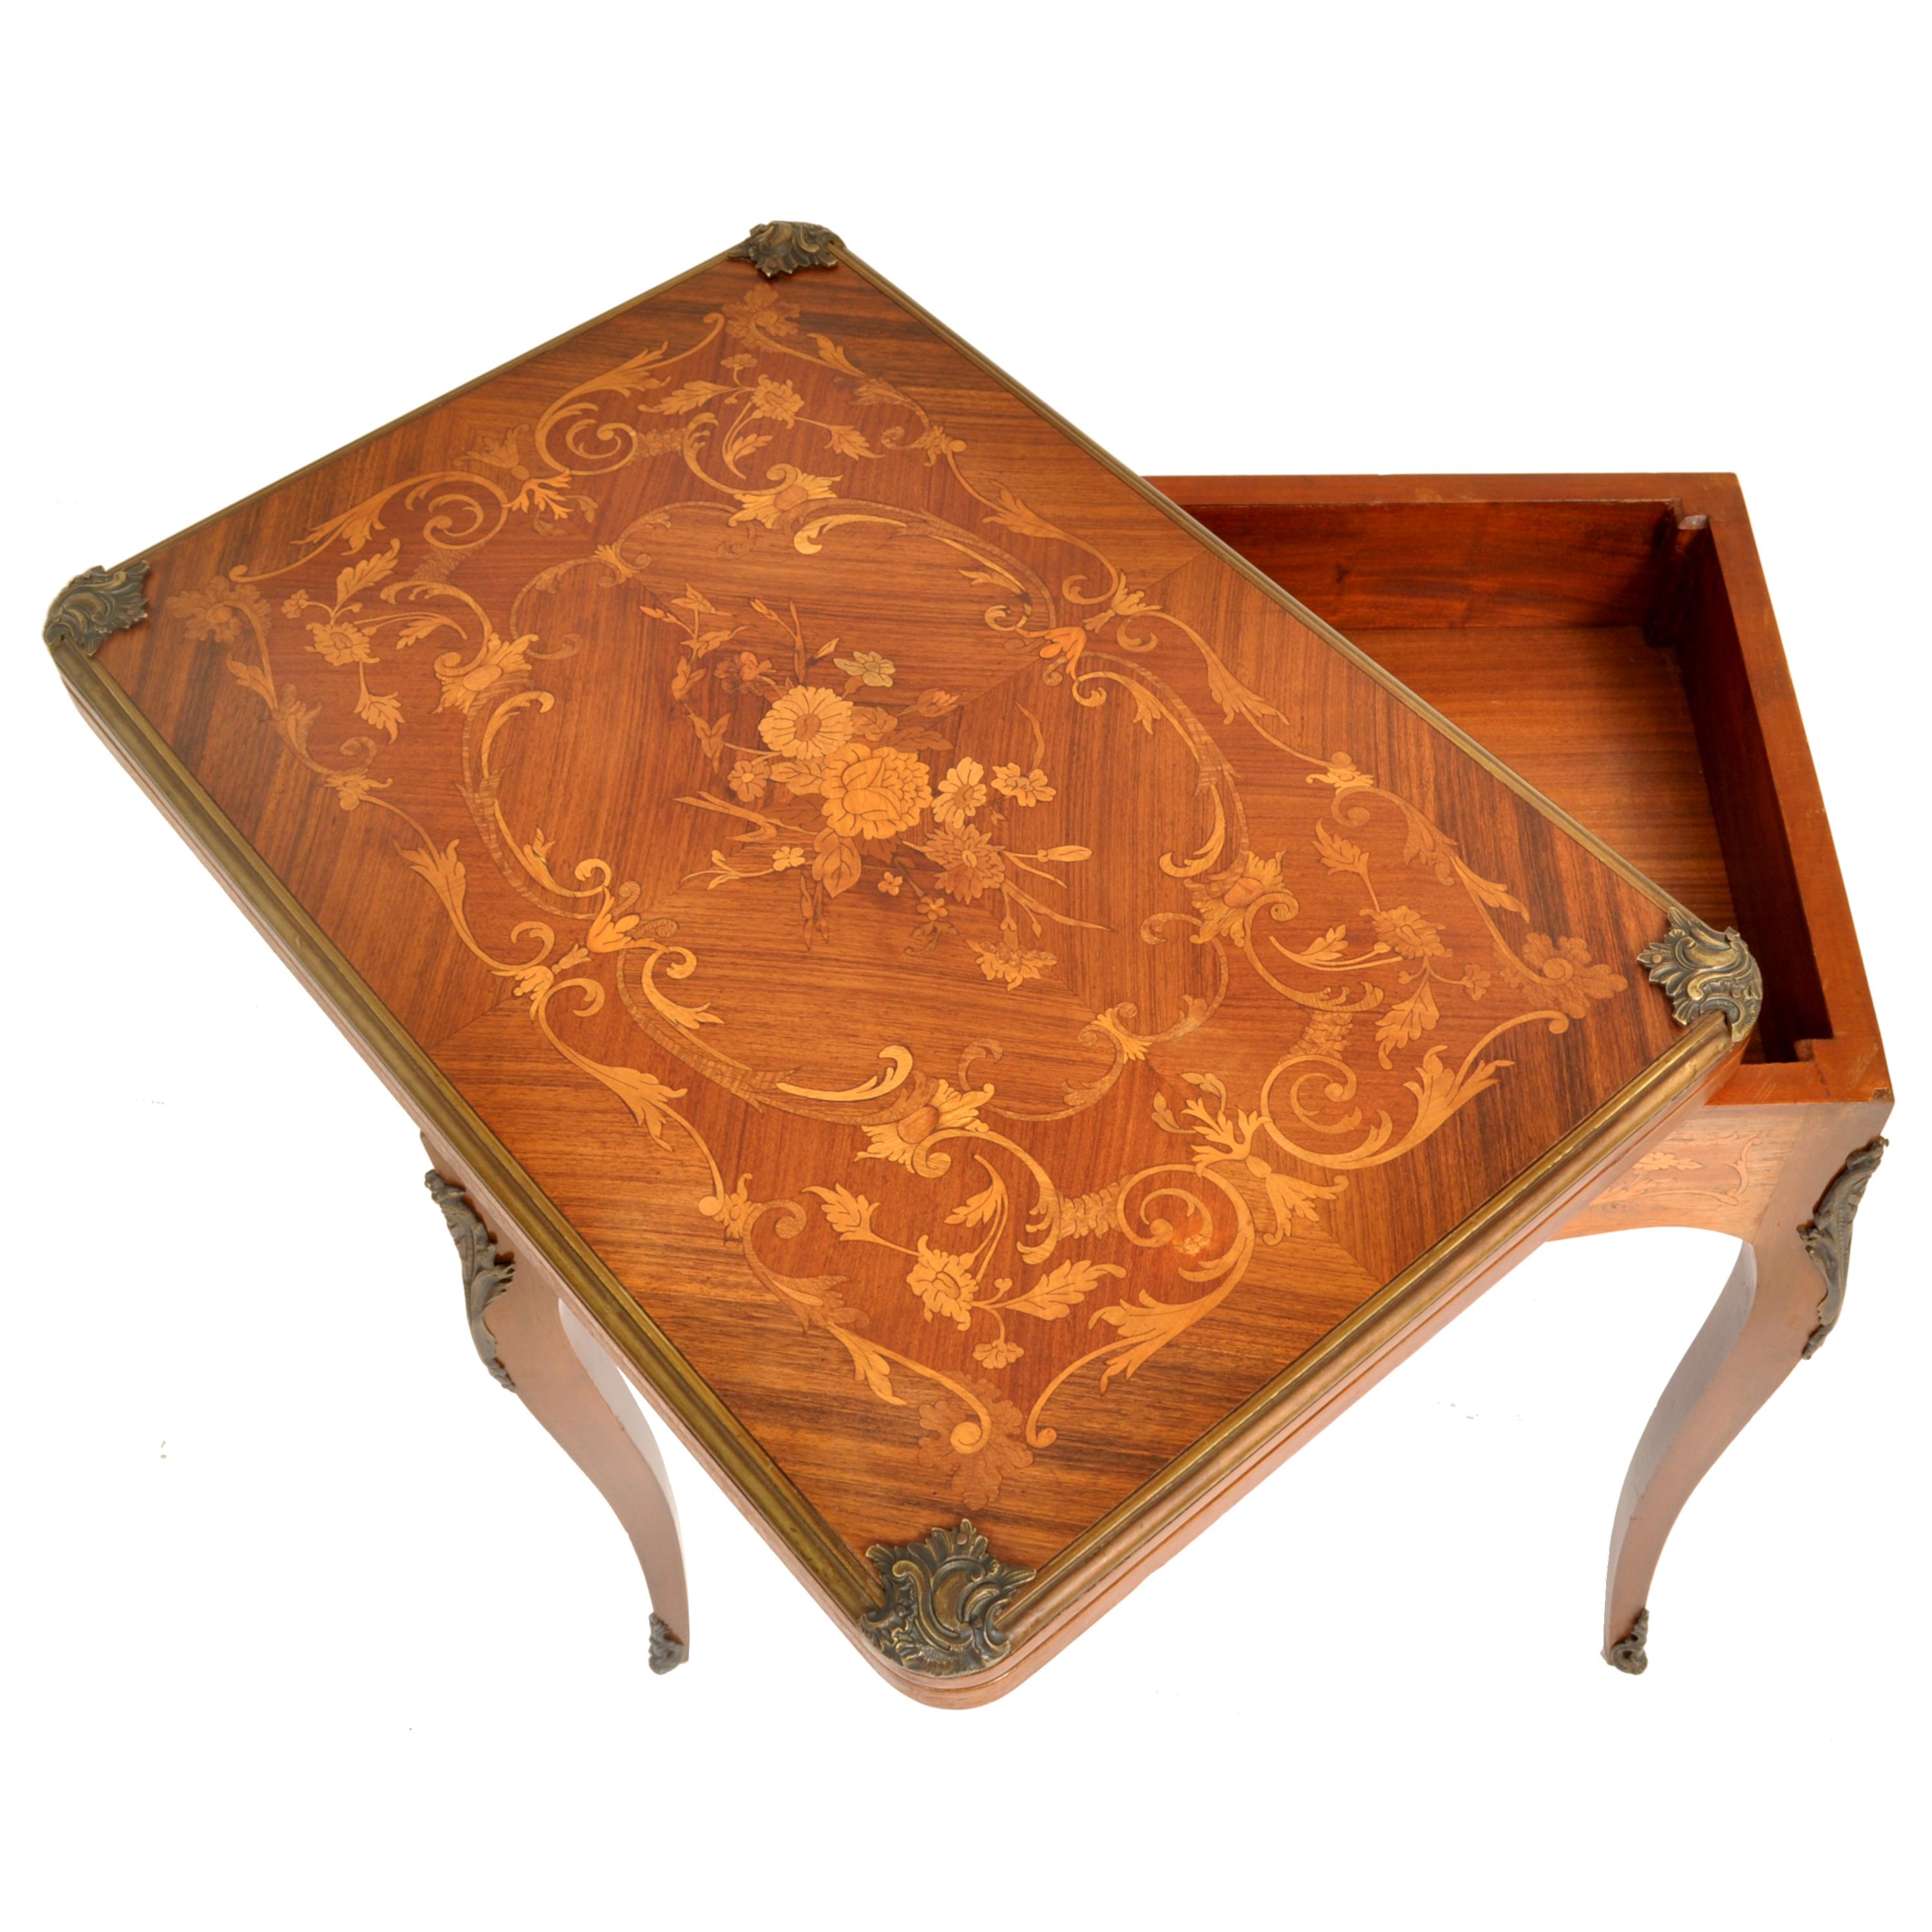 Late 19th Century Antique French Louis XVI Walnut Fruitwood Inlaid Ormolu Card Games Table, 1880 For Sale